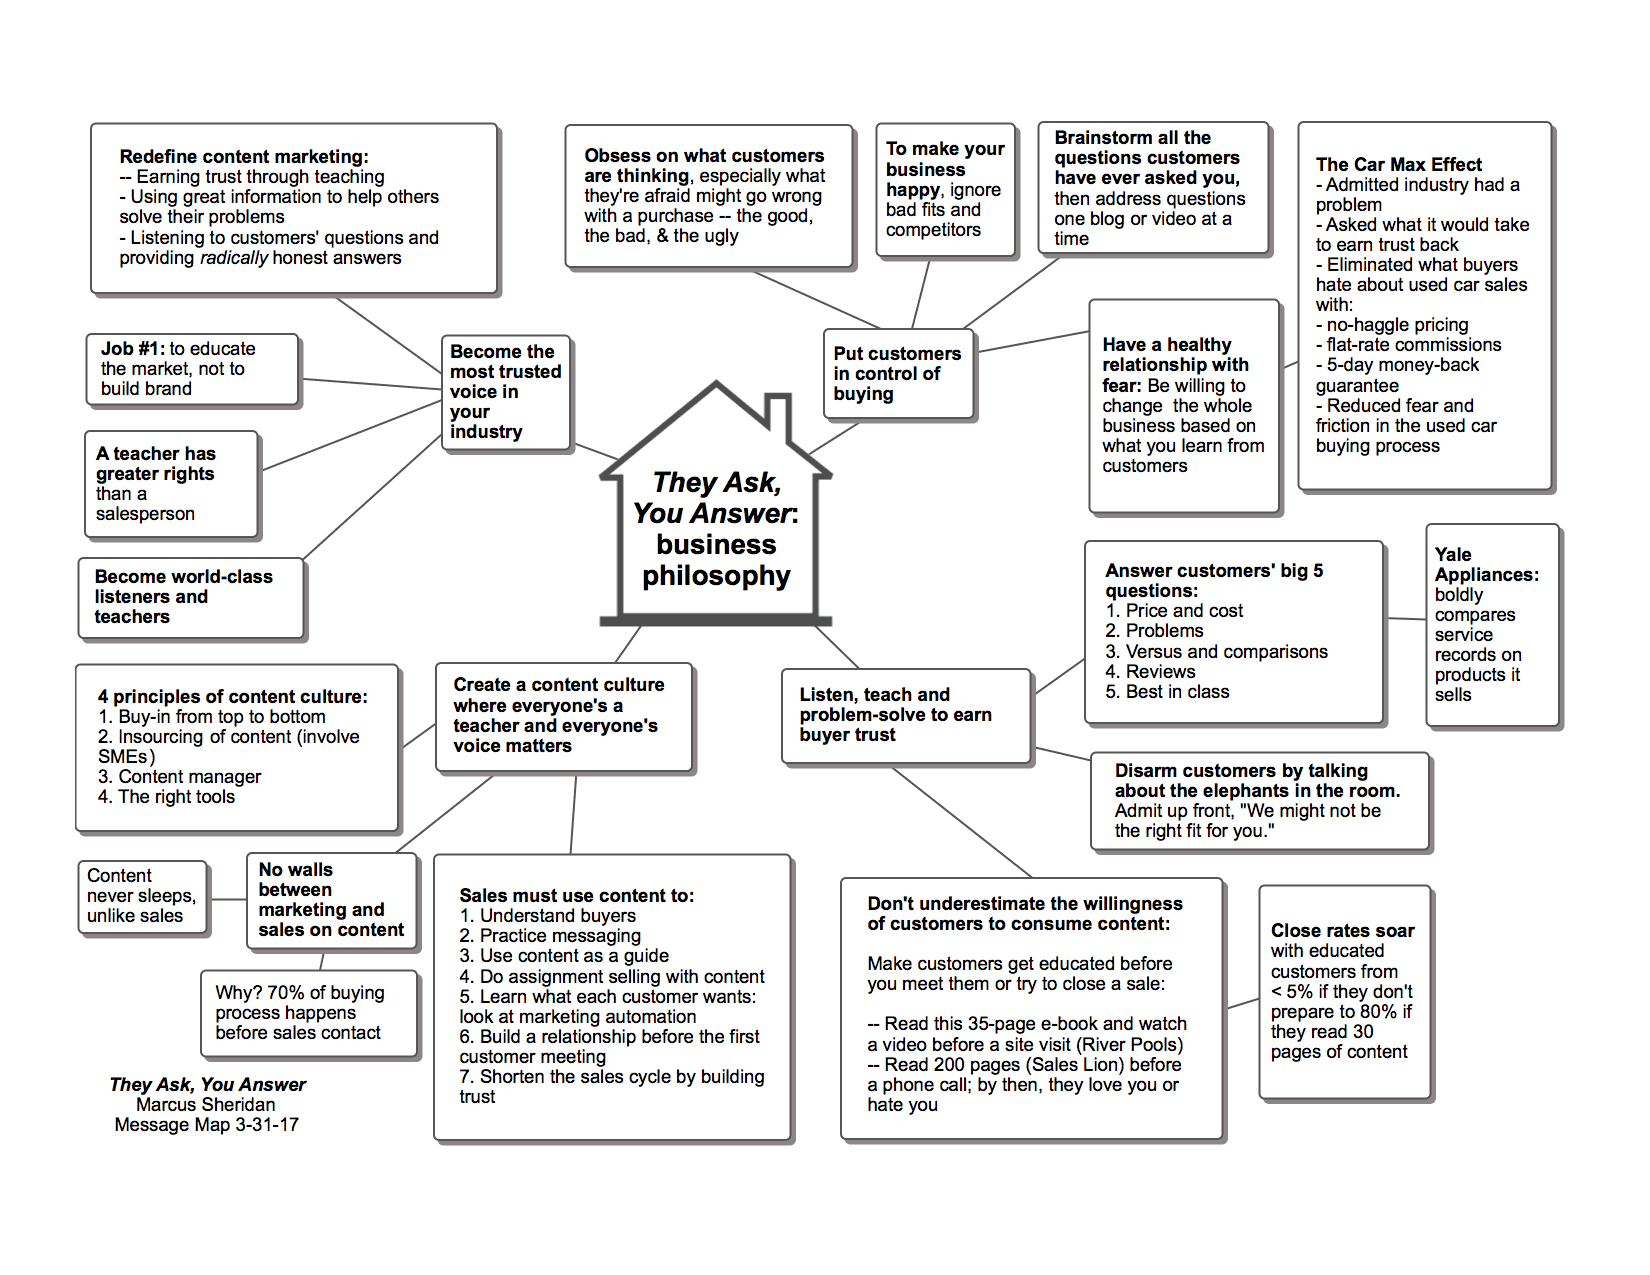 They Ask You Answer Message Map